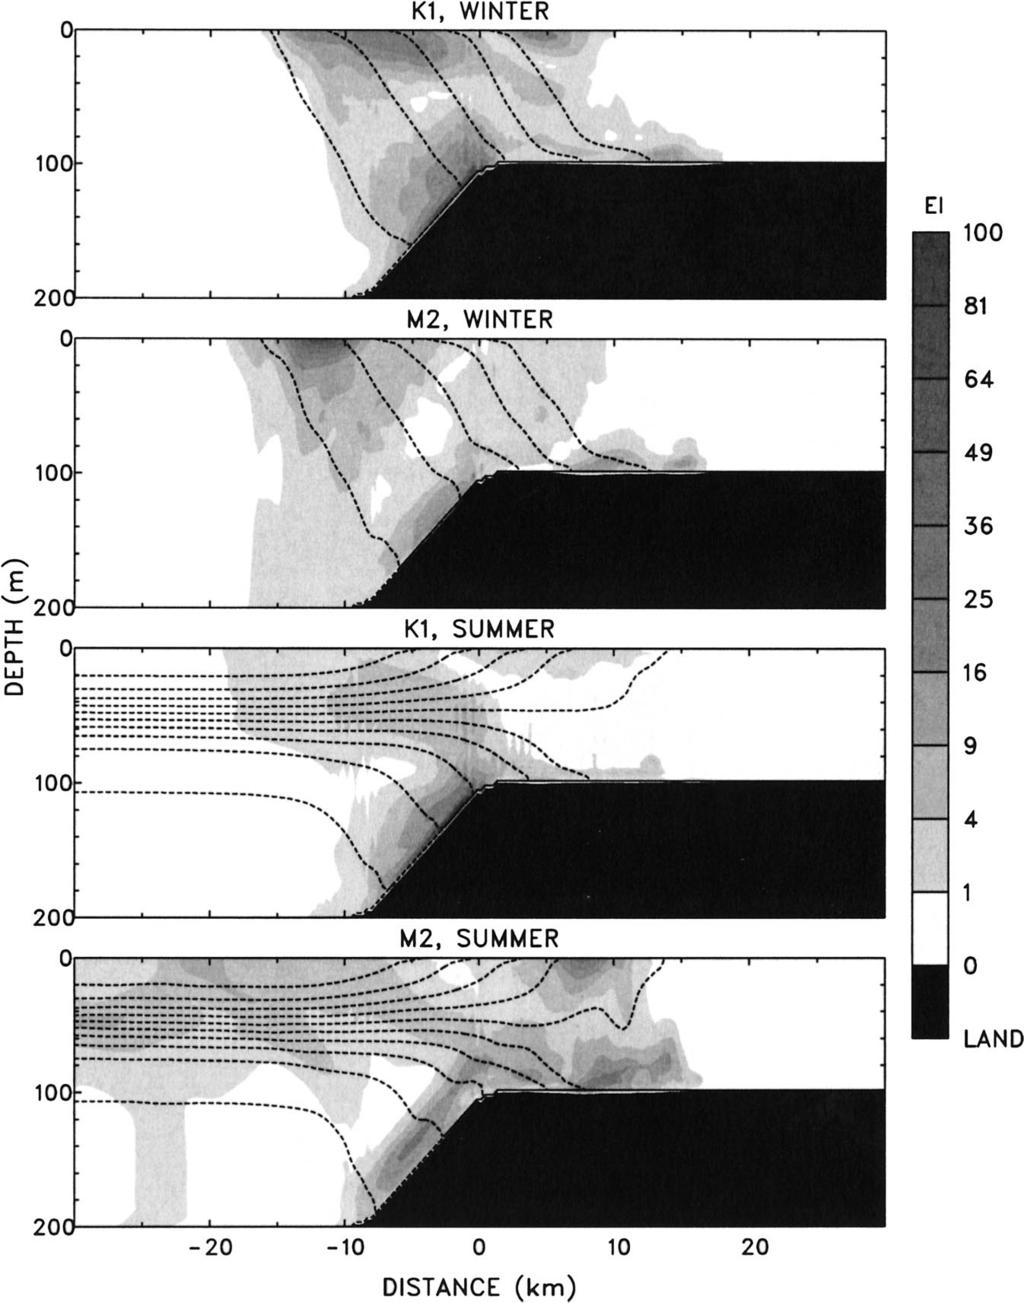 180 JOURNAL OF PHYSICAL OCEANOGRAPHY VOLUME 33 FIG. 8. Mean energy density (J m 3 ) of internal tides for different cases (shades). Density field is shown as dashed contour lines.